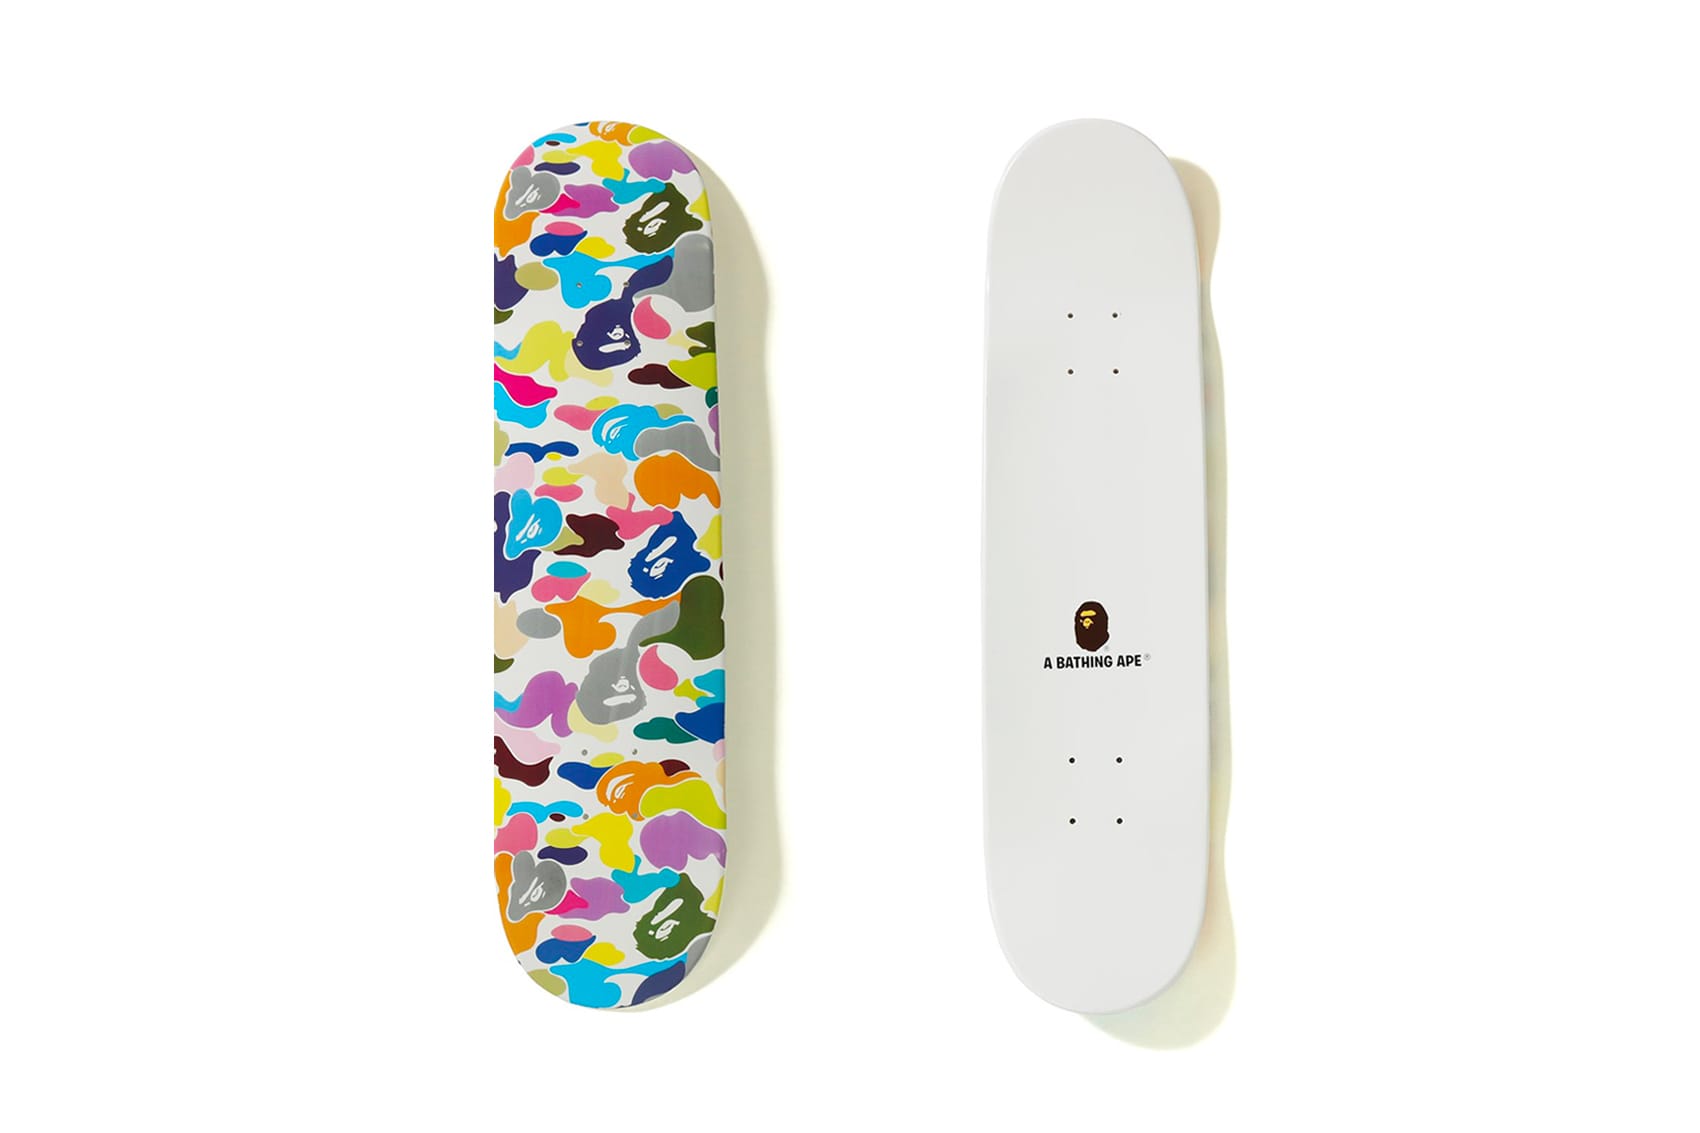 Details about   AAPE by A BATHING APE Skate Deck Skateboard Bape Camo Black Brown Rare Limited 